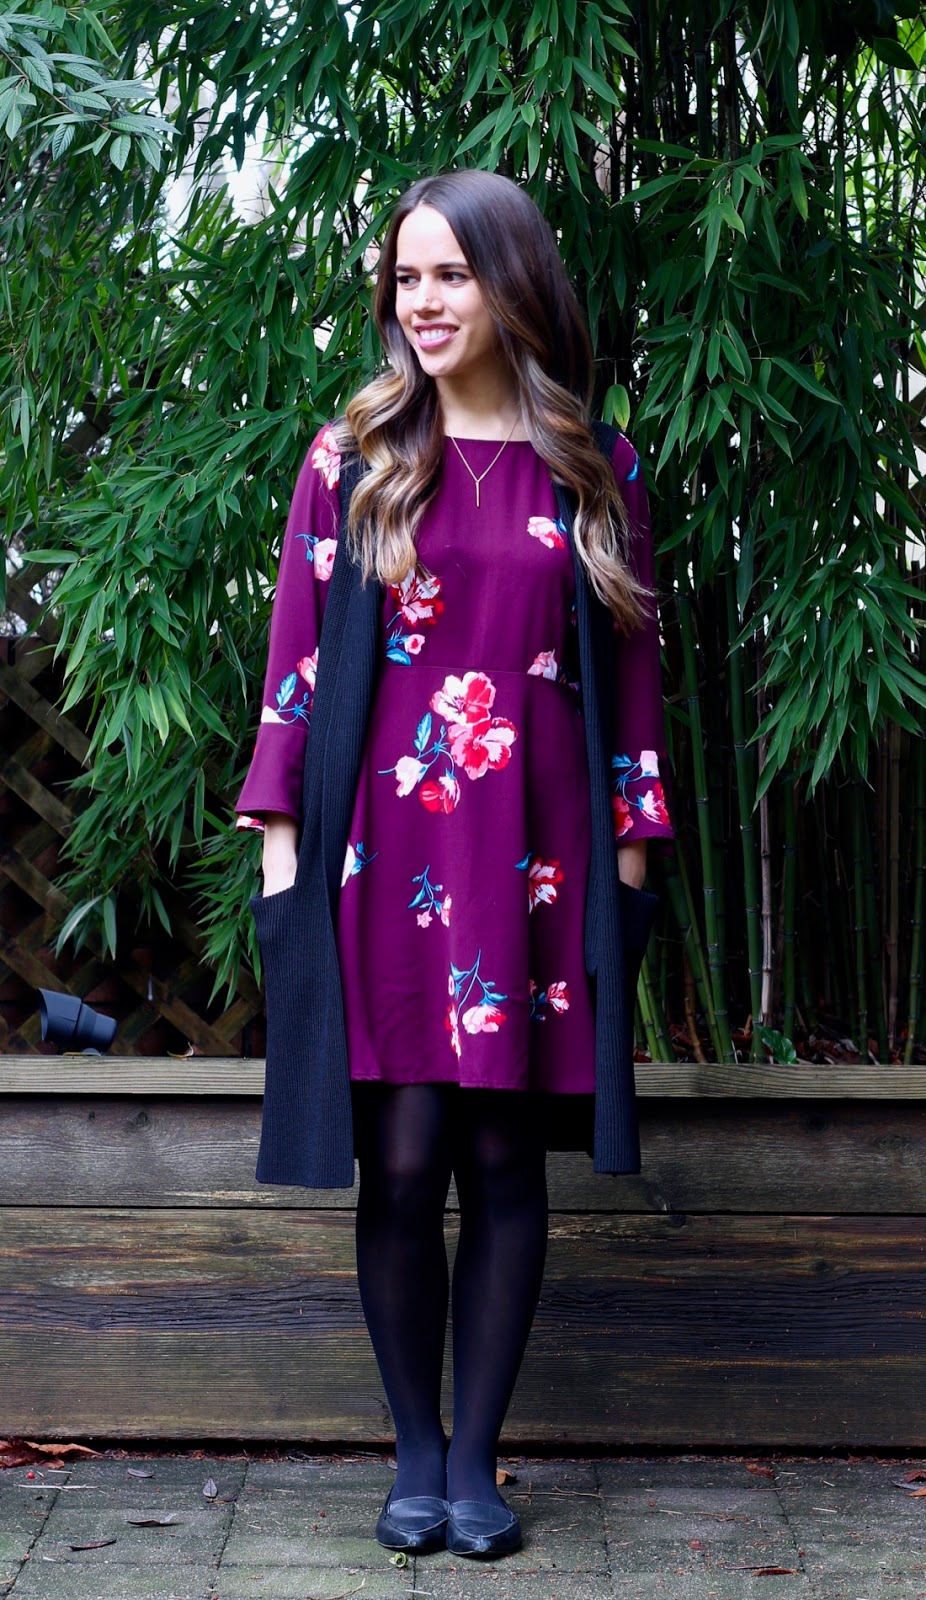 Jules in Flats - Fit and Flare Flute Sleeve Dress with Sweater Vest (Business Casual Winter Workwear on a Budget)